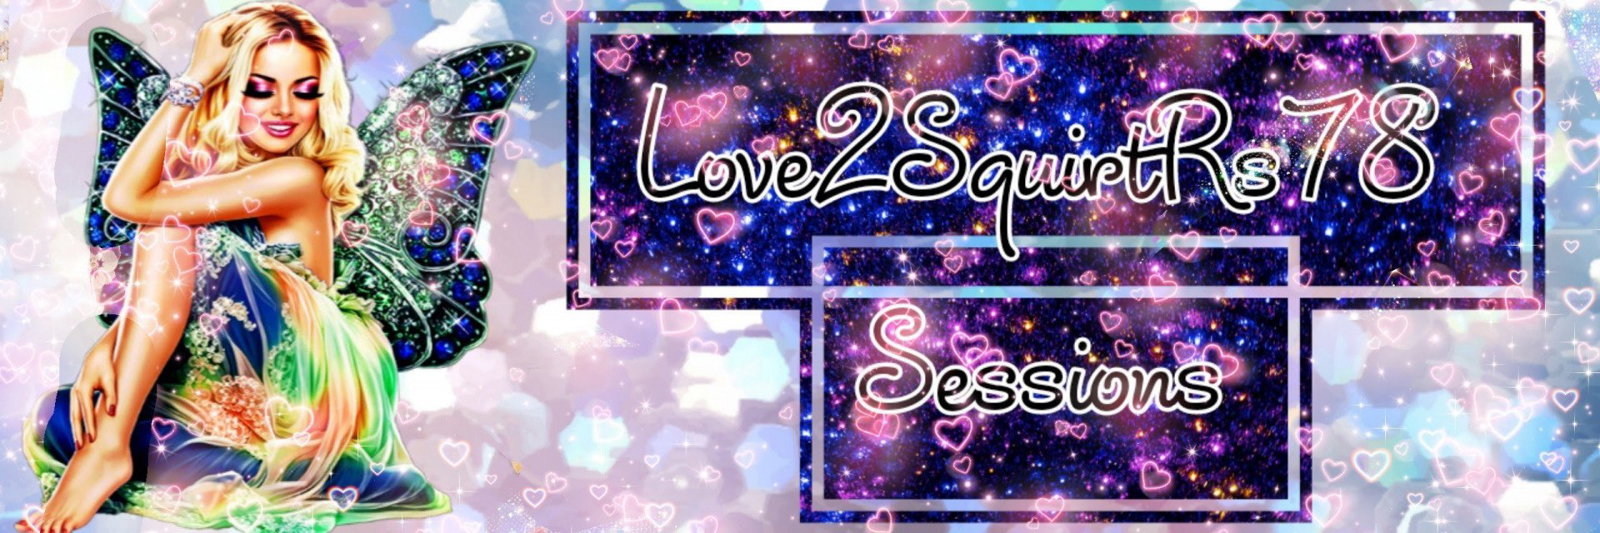 Cover photo of Love2SquirtRs78